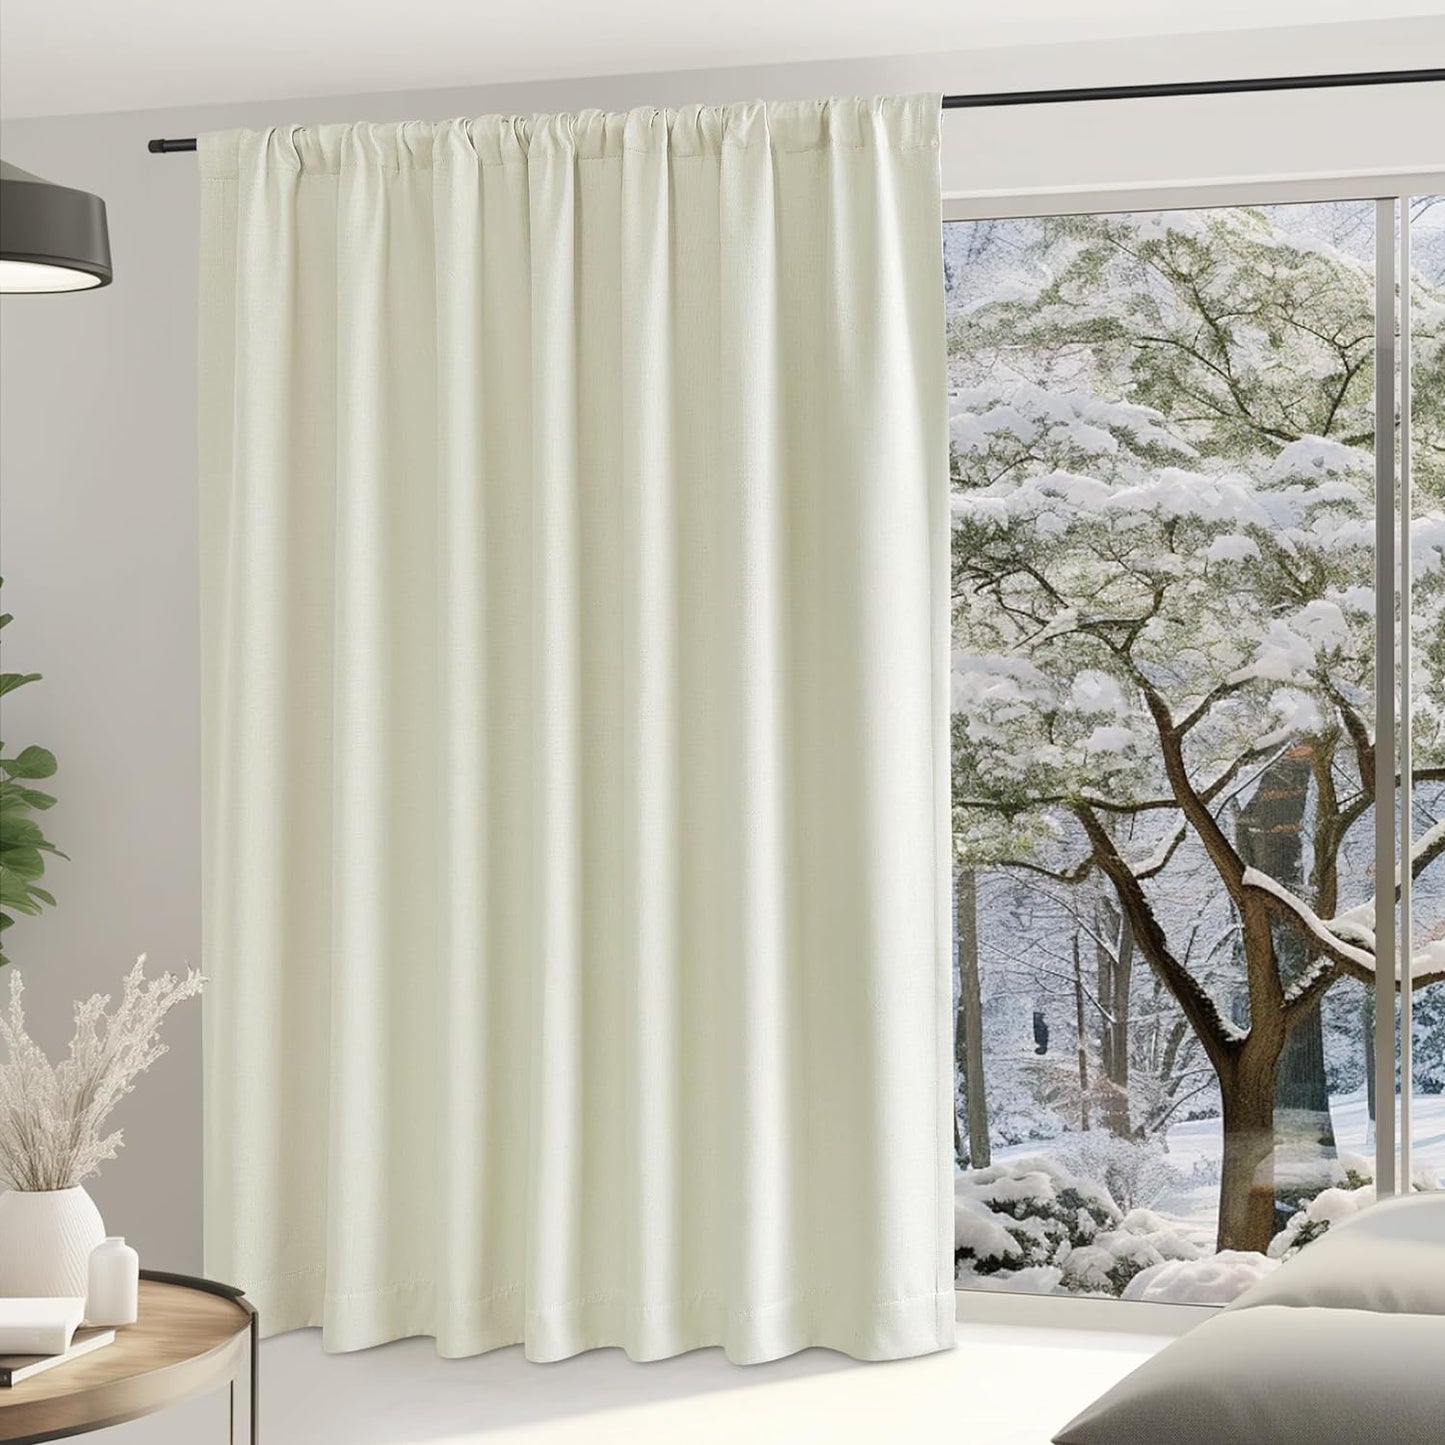 NICETOWN Sliding Door Curtains 84 Inch Length for Bedroom, Room Darkening Hook Belt/Rod Pocket/Back Tab Faux Linen Thermal Window Treatments for Living Room, Natural, W100 X L84, 1 Panel  NICETOWN   